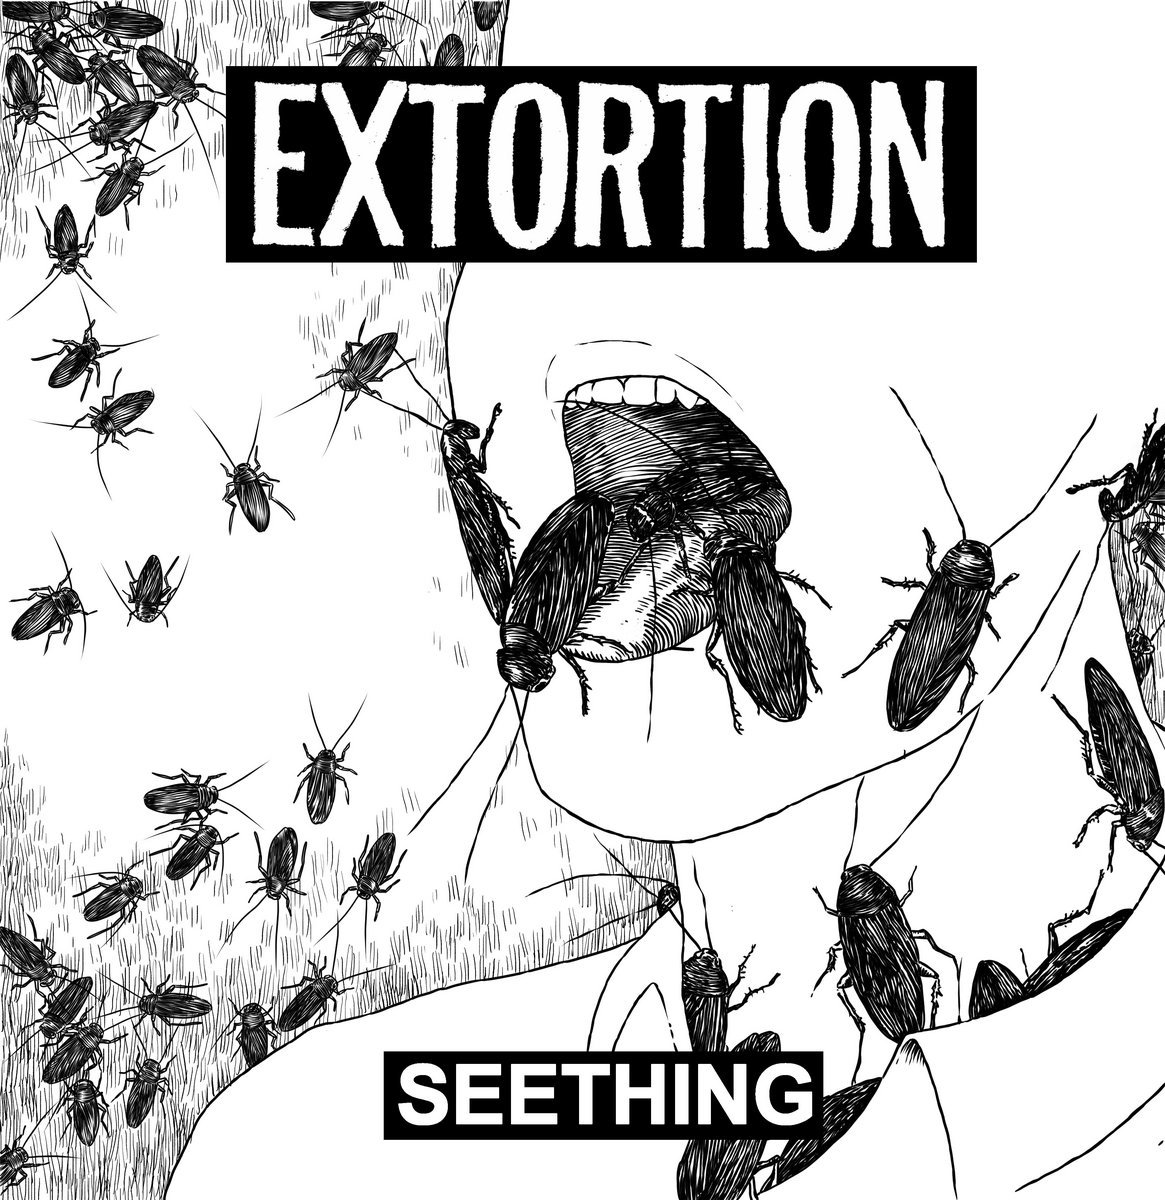 Image of Extortion - "Seething" 7" or 12" (German Imports)